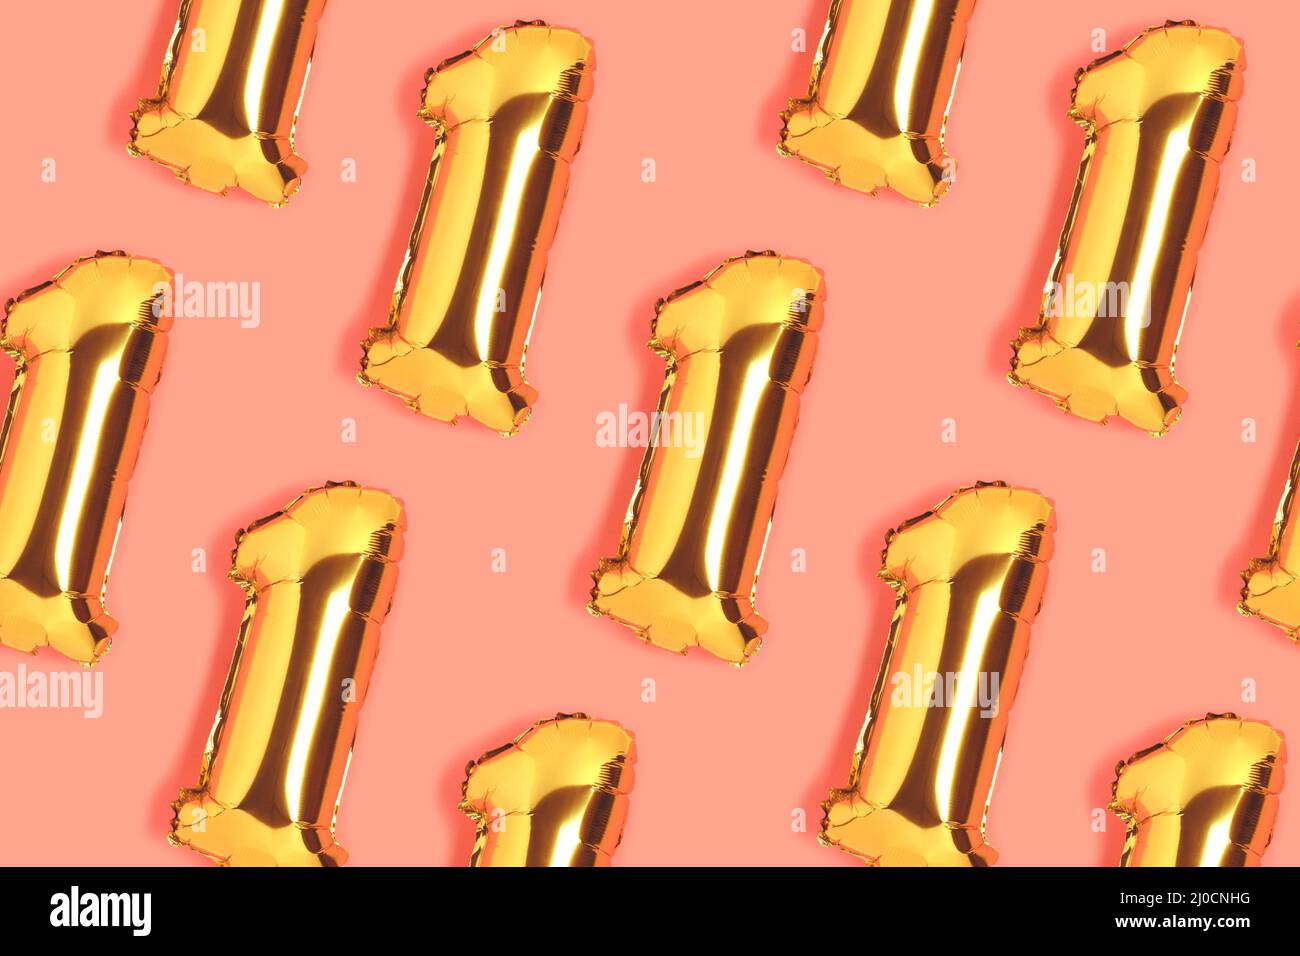 Number 1 golden balloons pattern. One year anniversary celebration concept on a coral colored background. Stock Photo